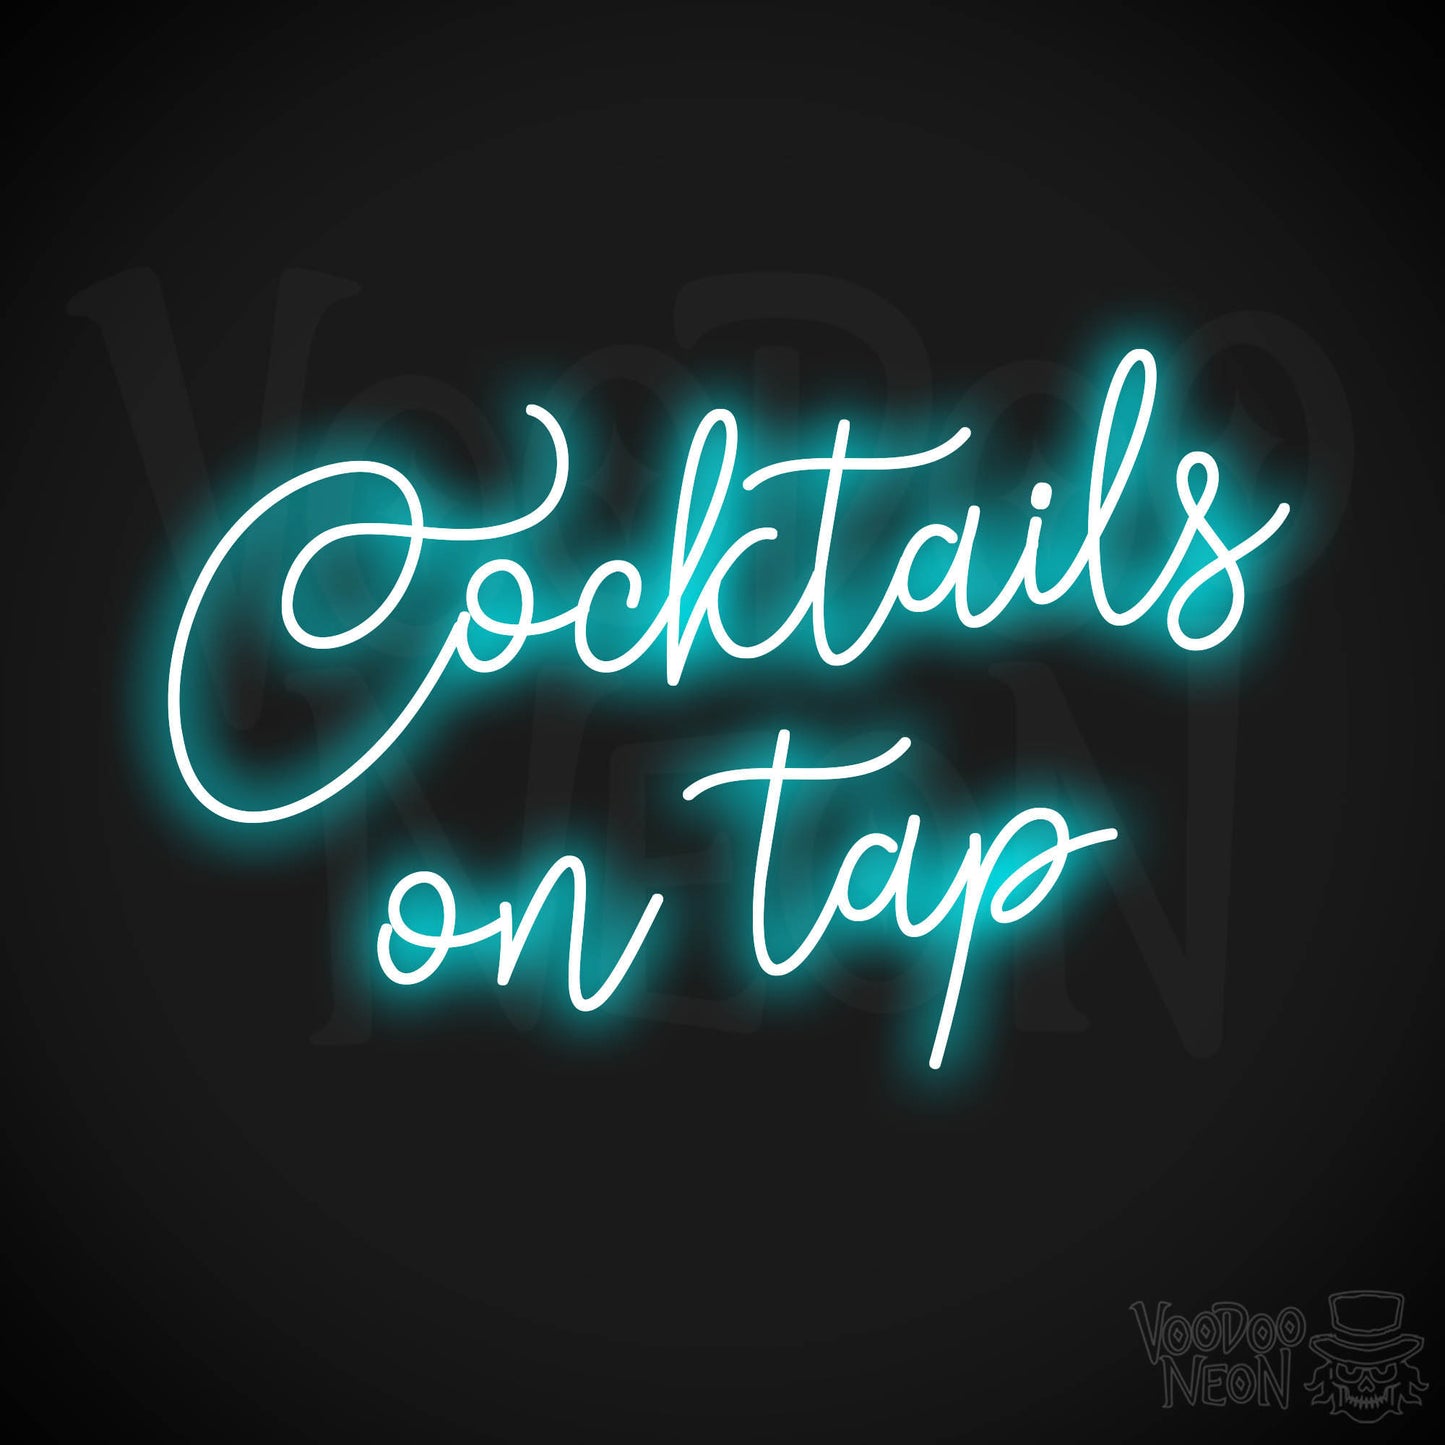 Cocktails On Tap LED Neon - Ice Blue